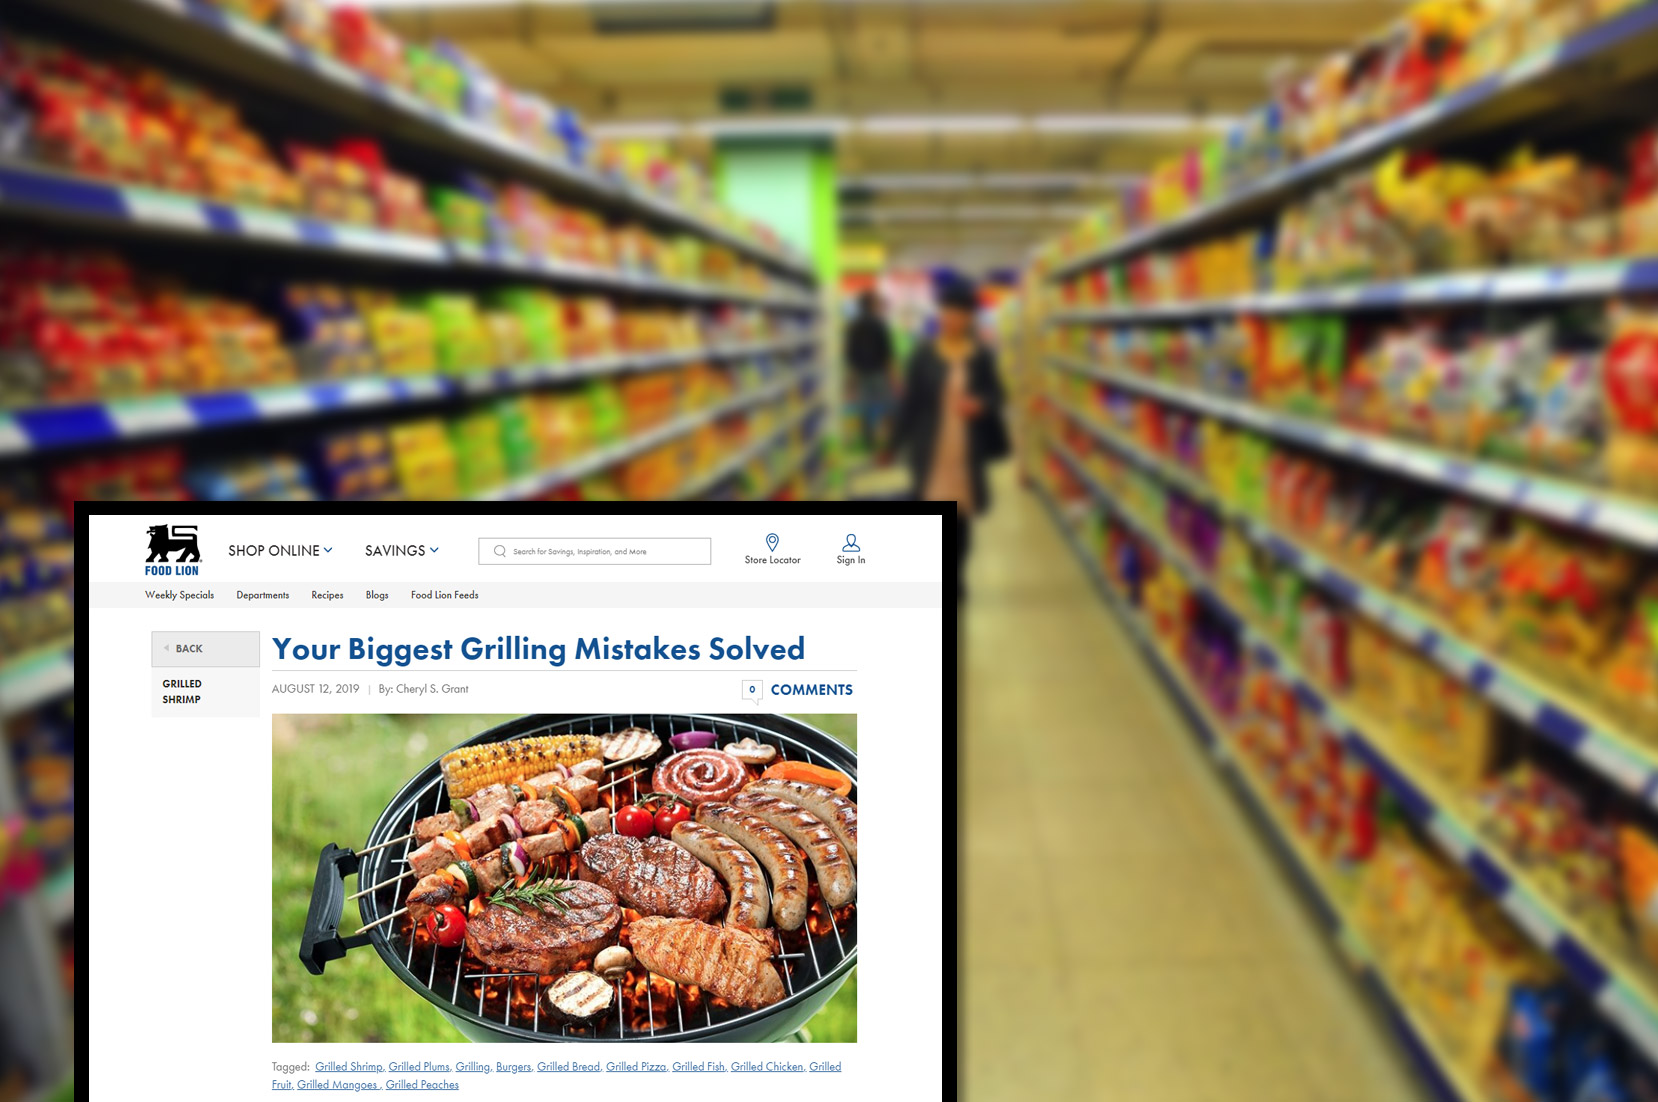 foodlion-comproduct-pricing-information-and-image-scraping-services